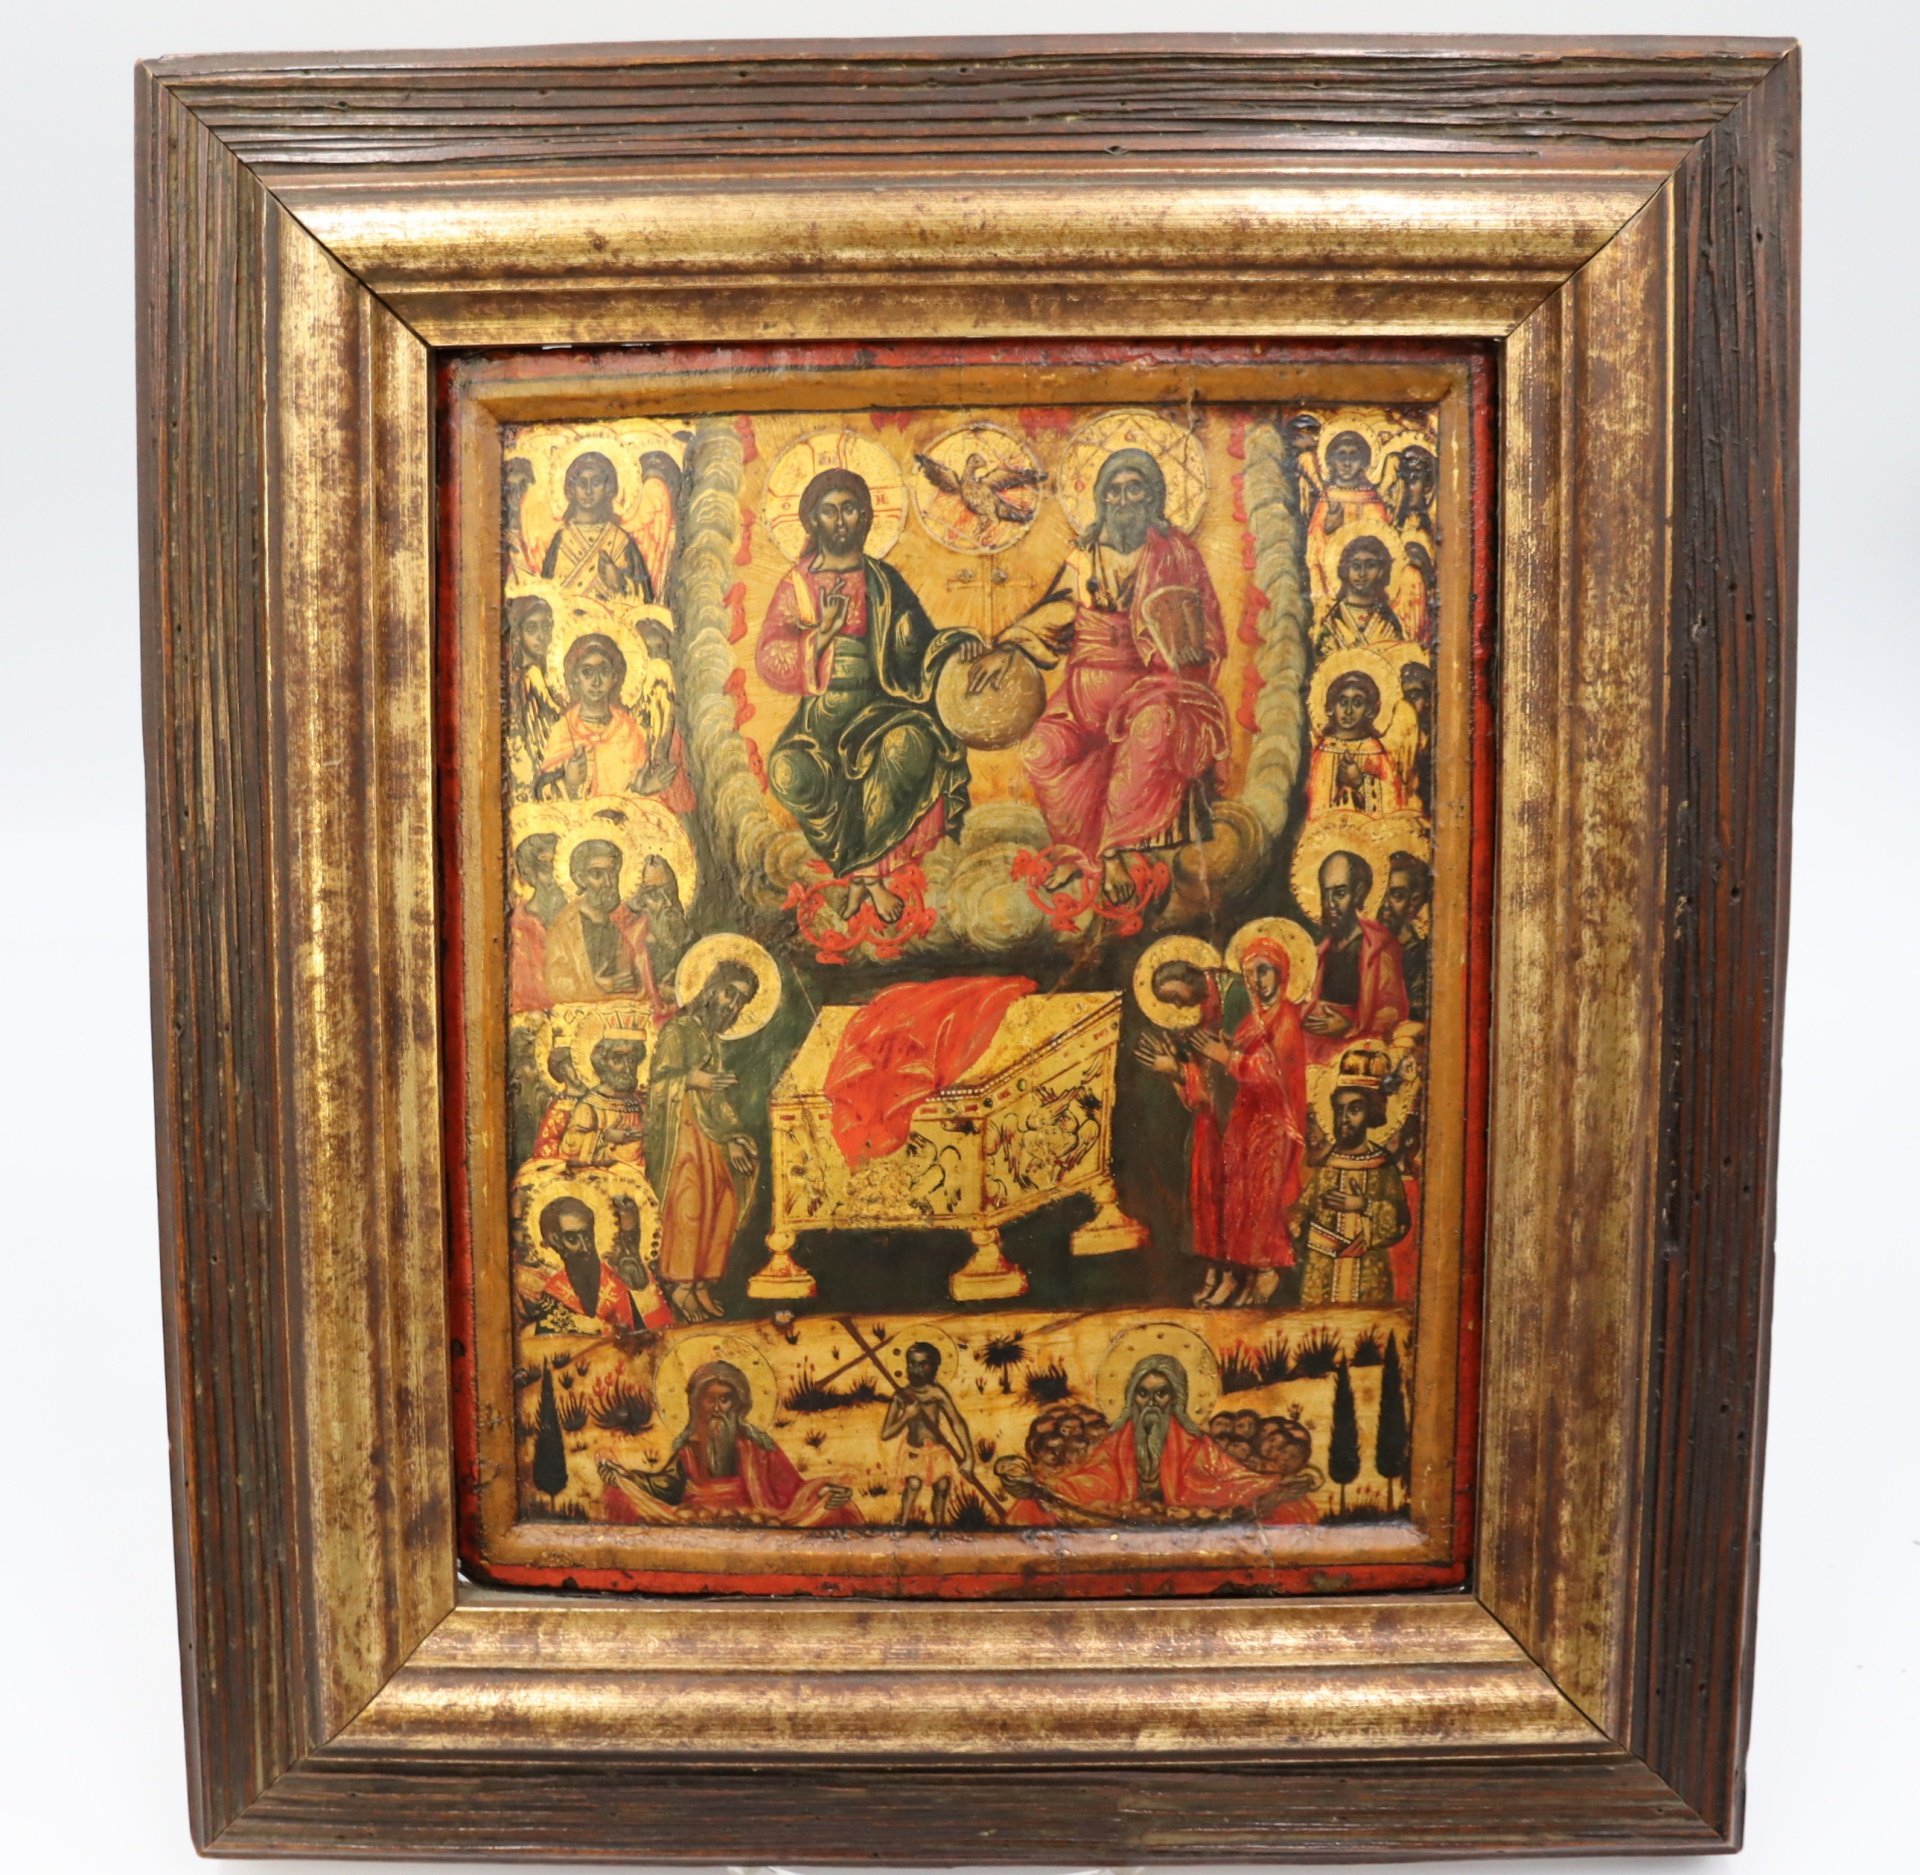 ANTIQUE PAINTED WOODEN ICON ON